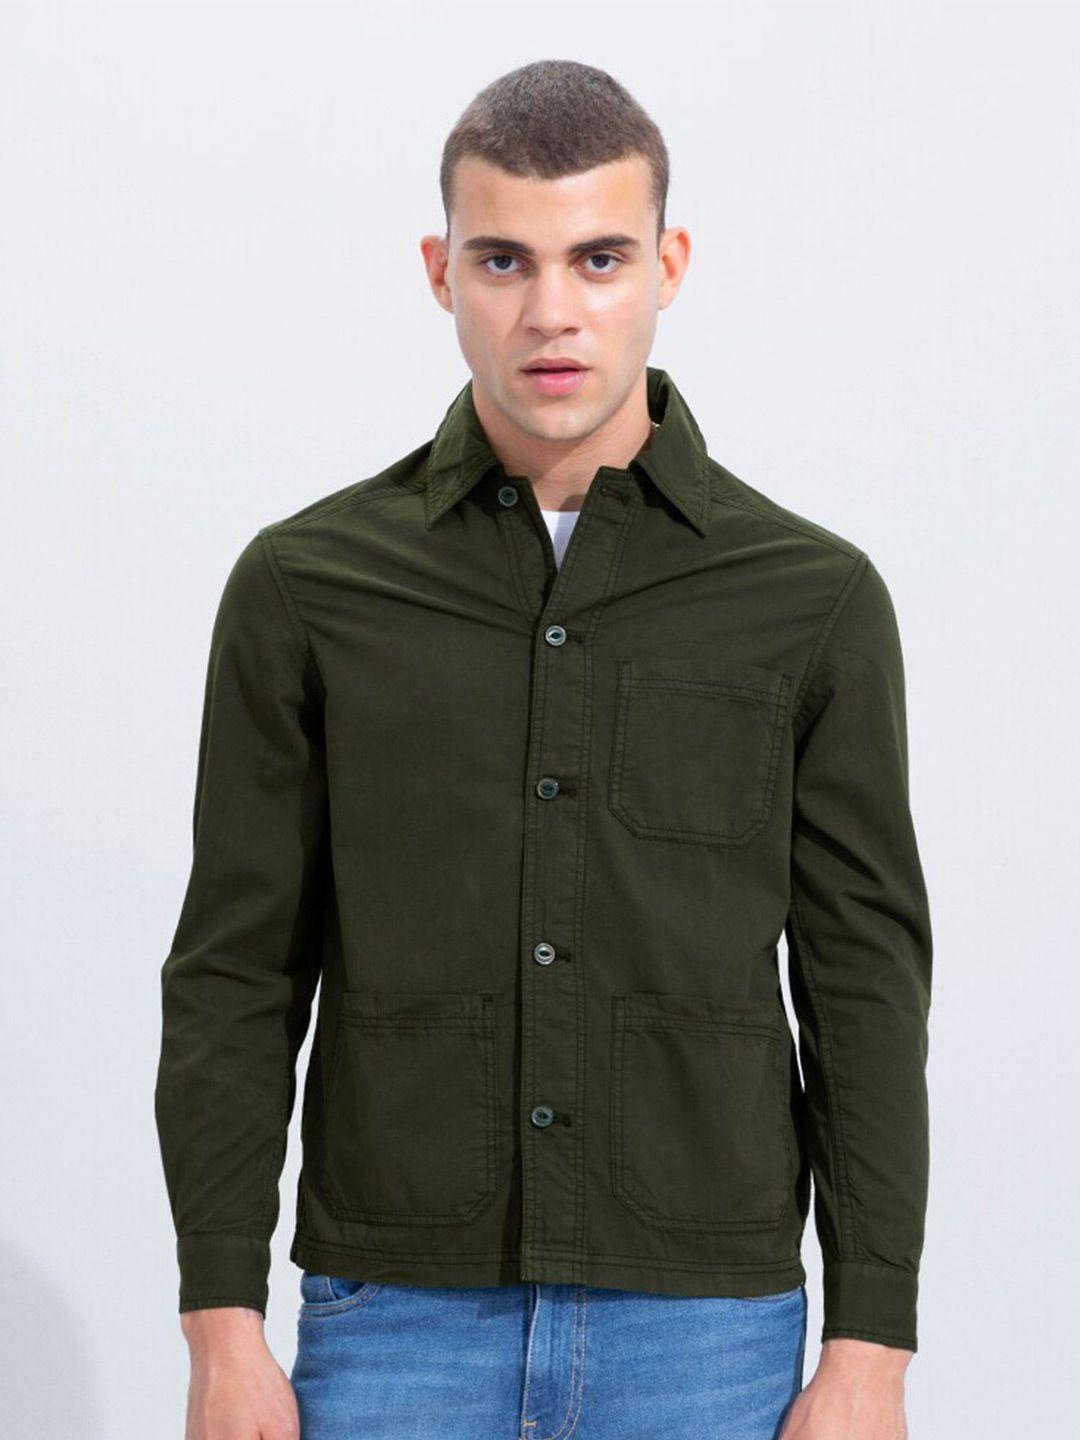 snitch olive green classic cotton casual shirt